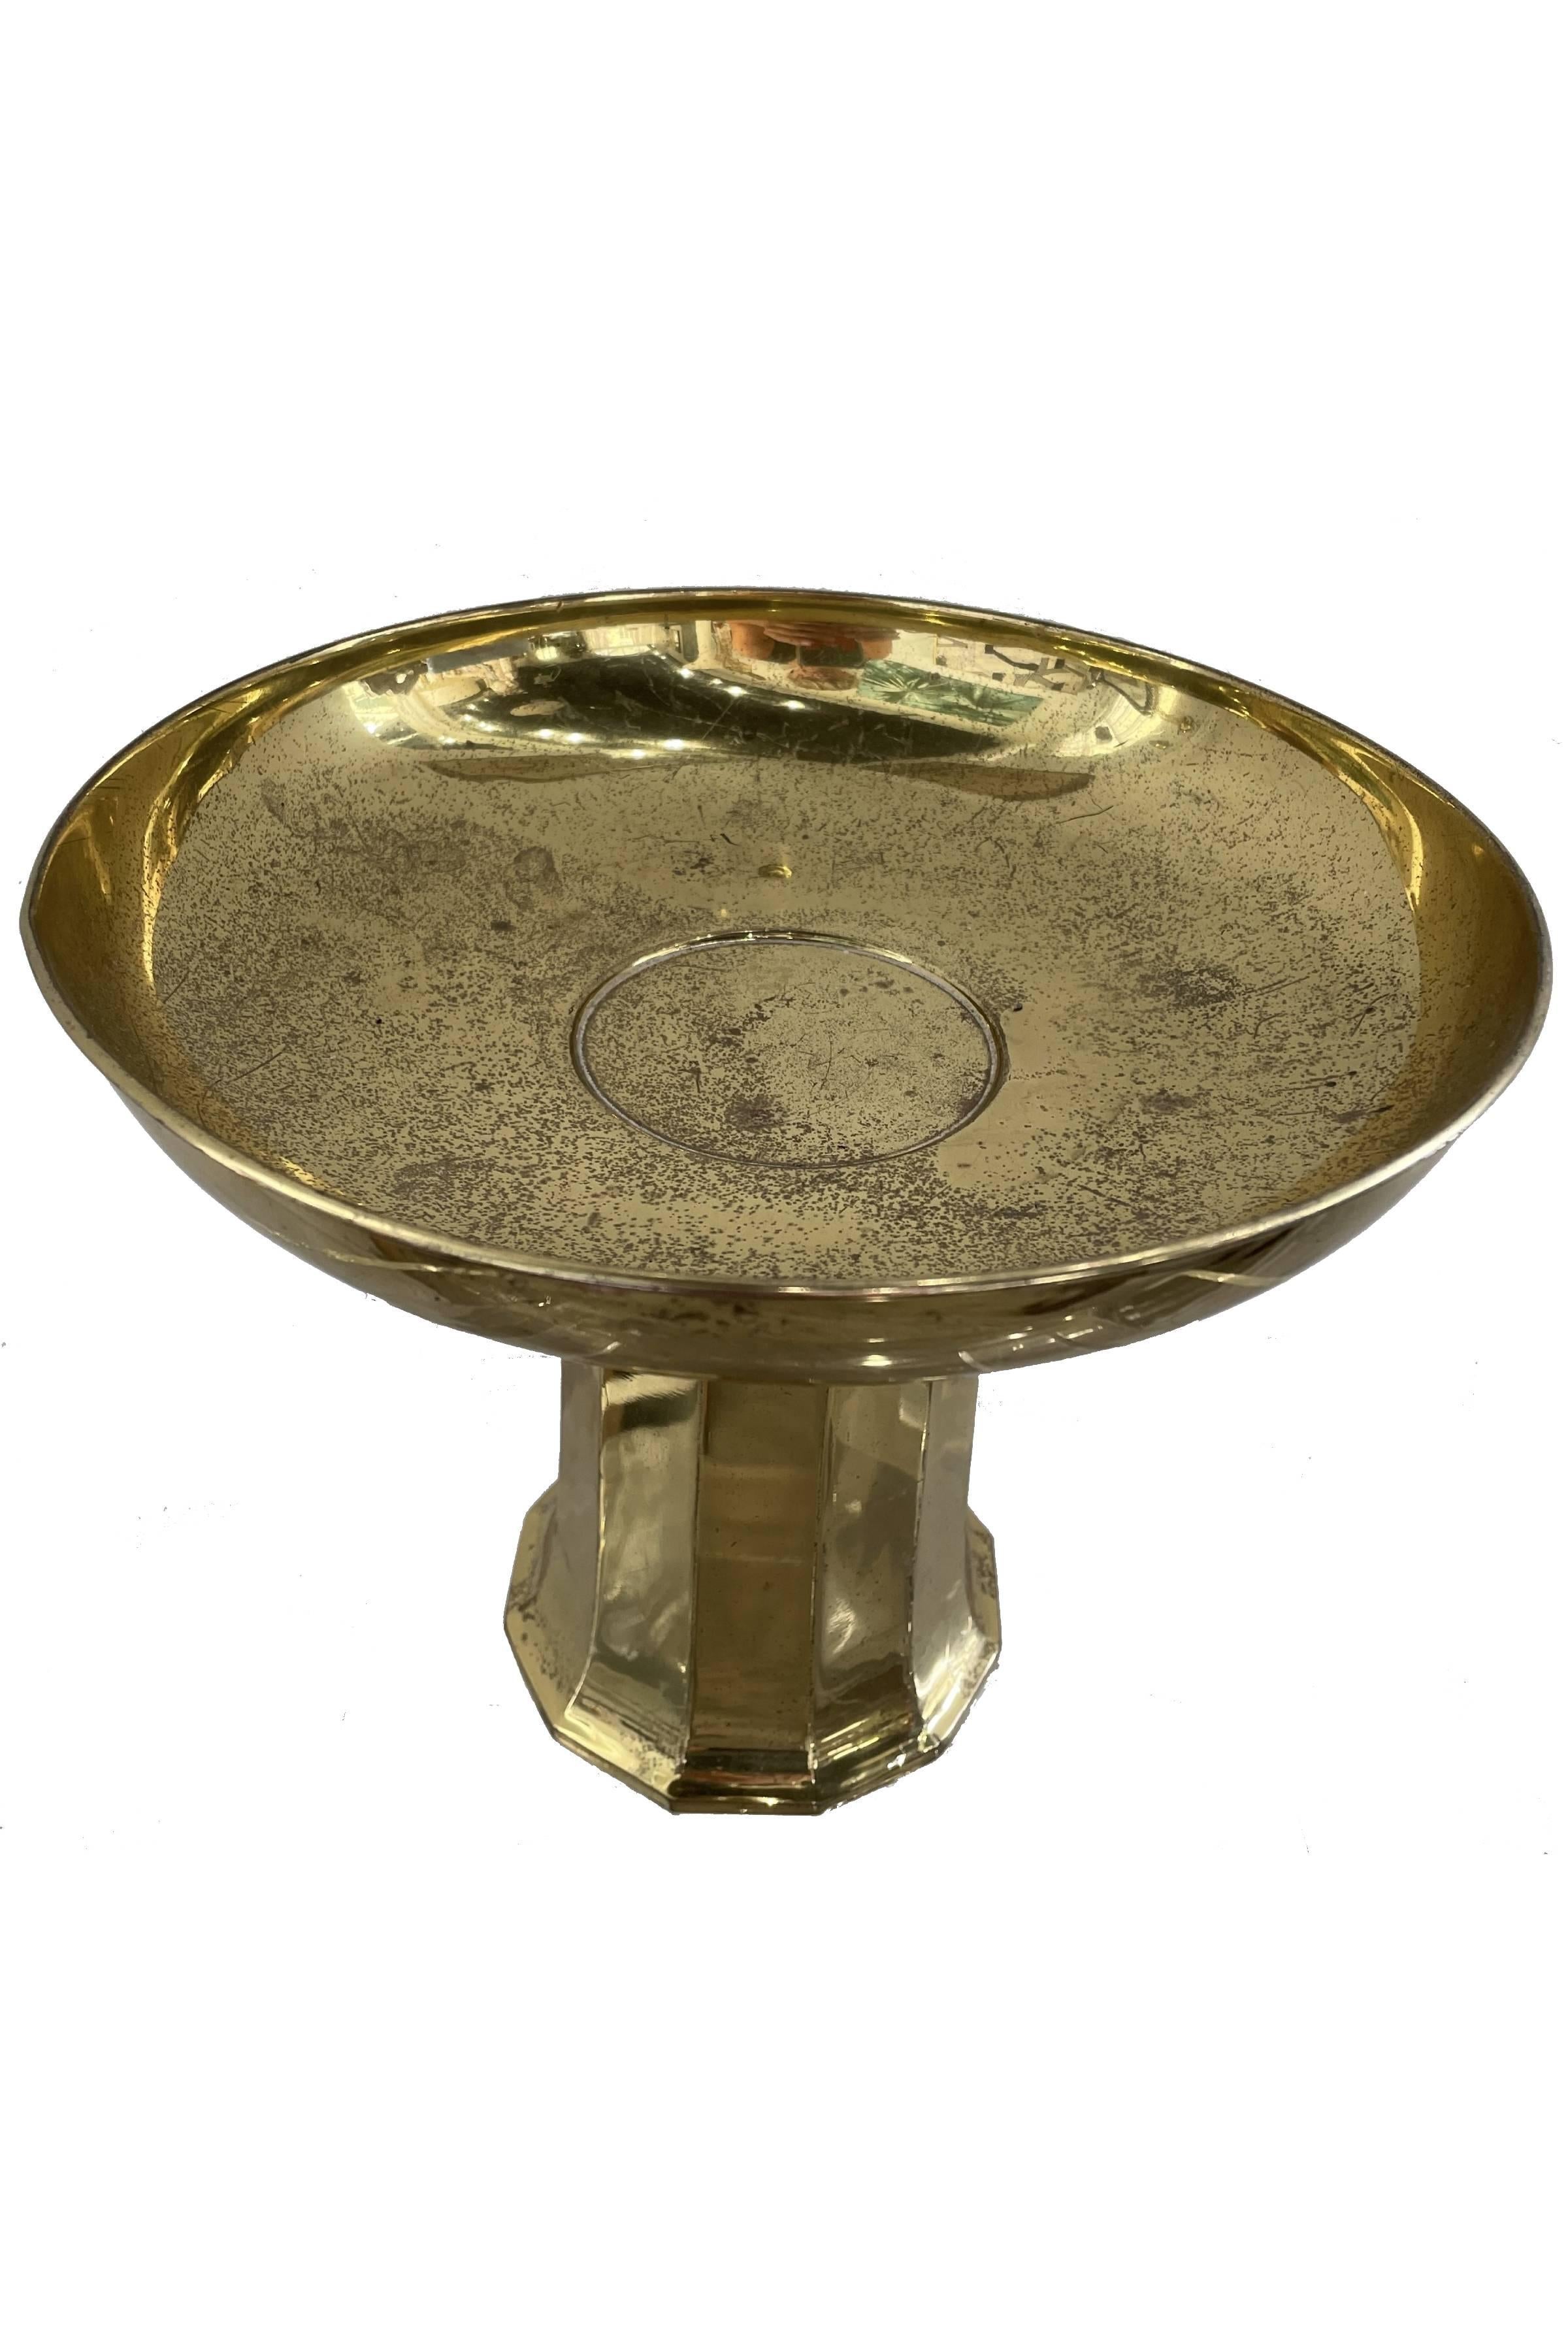 Brass Art Deco Footed Bowl In Good Condition For Sale In West Palm Beach, FL